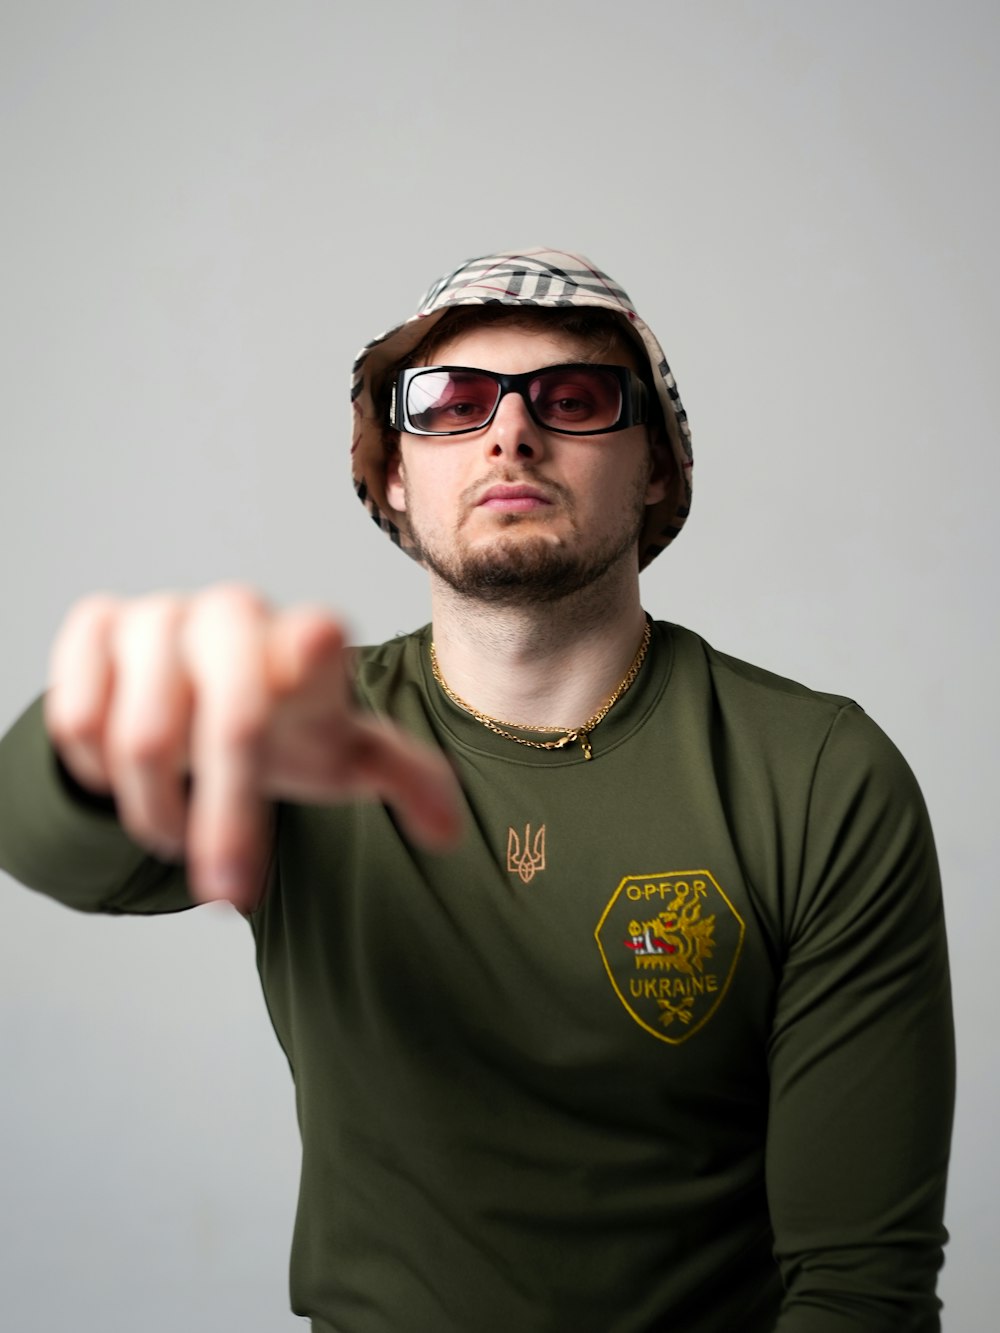 a man in a green shirt pointing at something